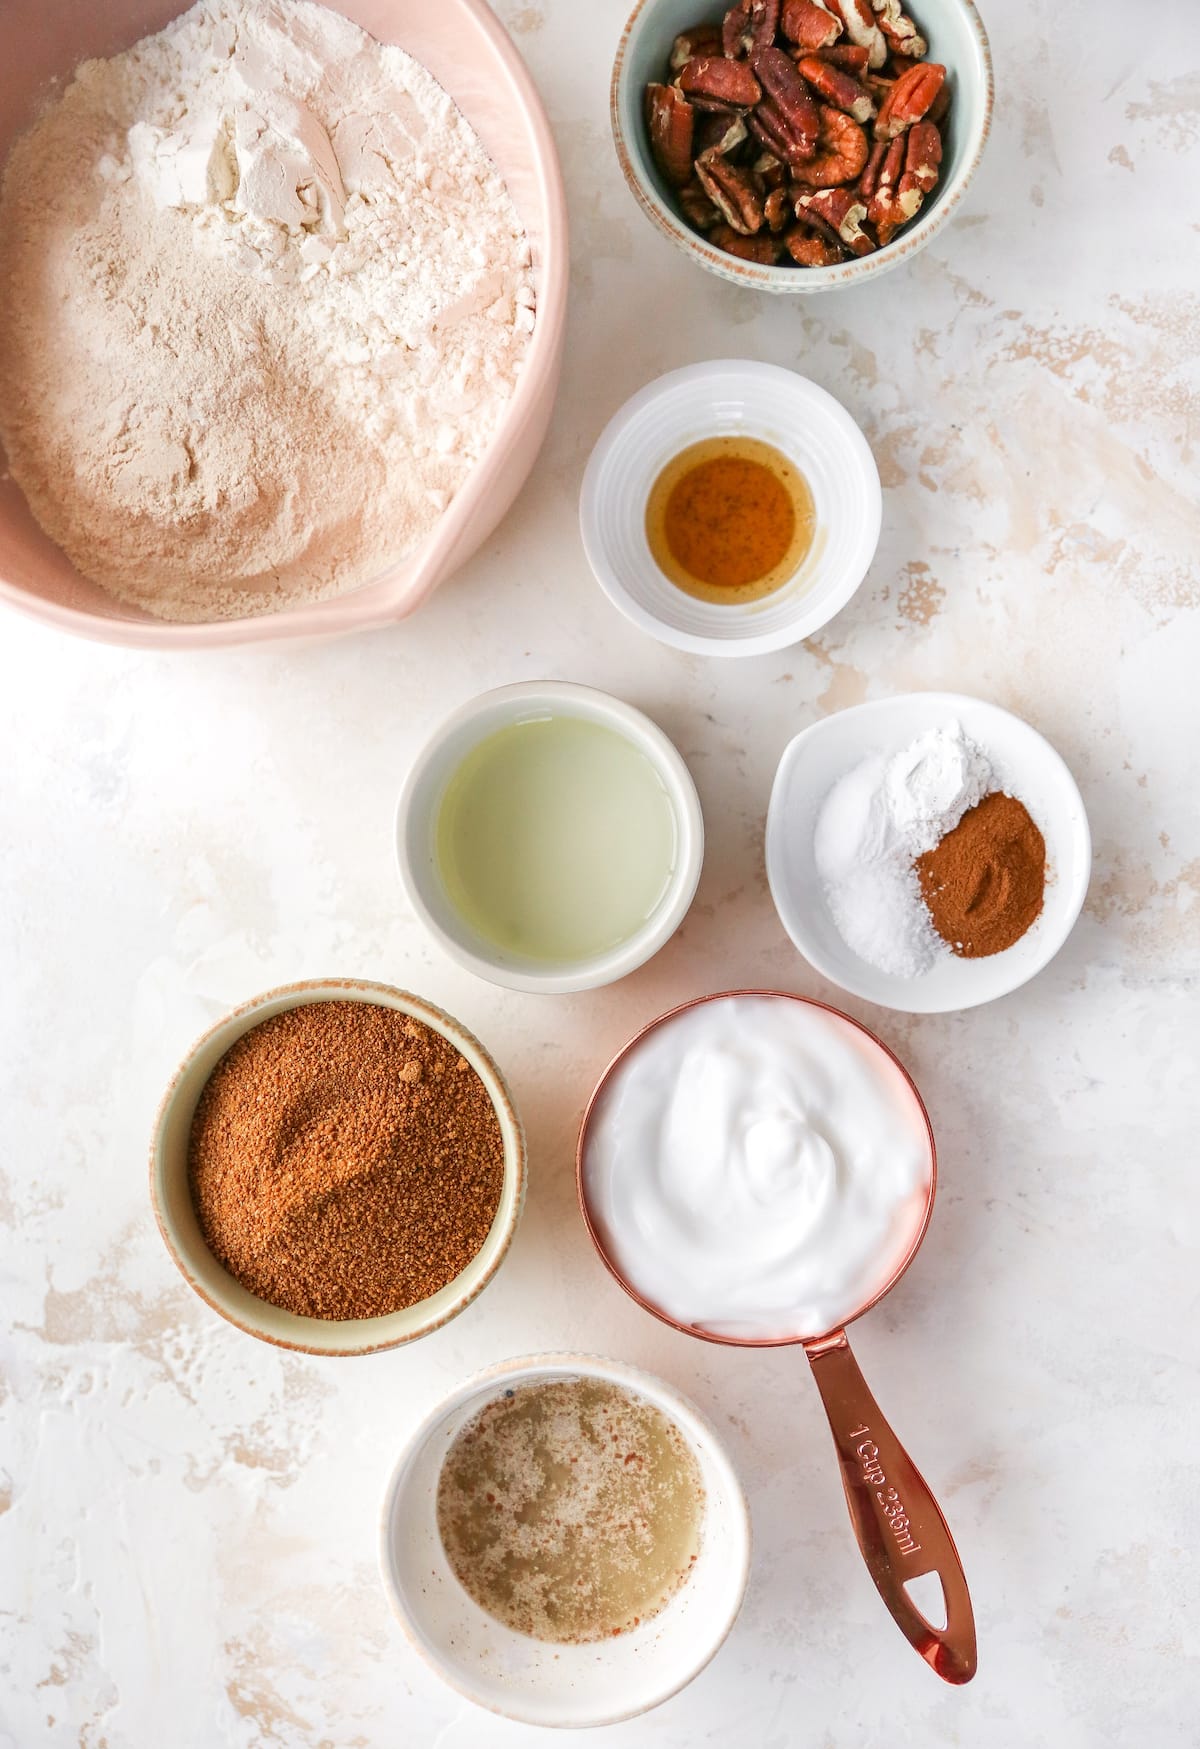 Ingredients to make coffee cake measured out into bowls and measuring cups.